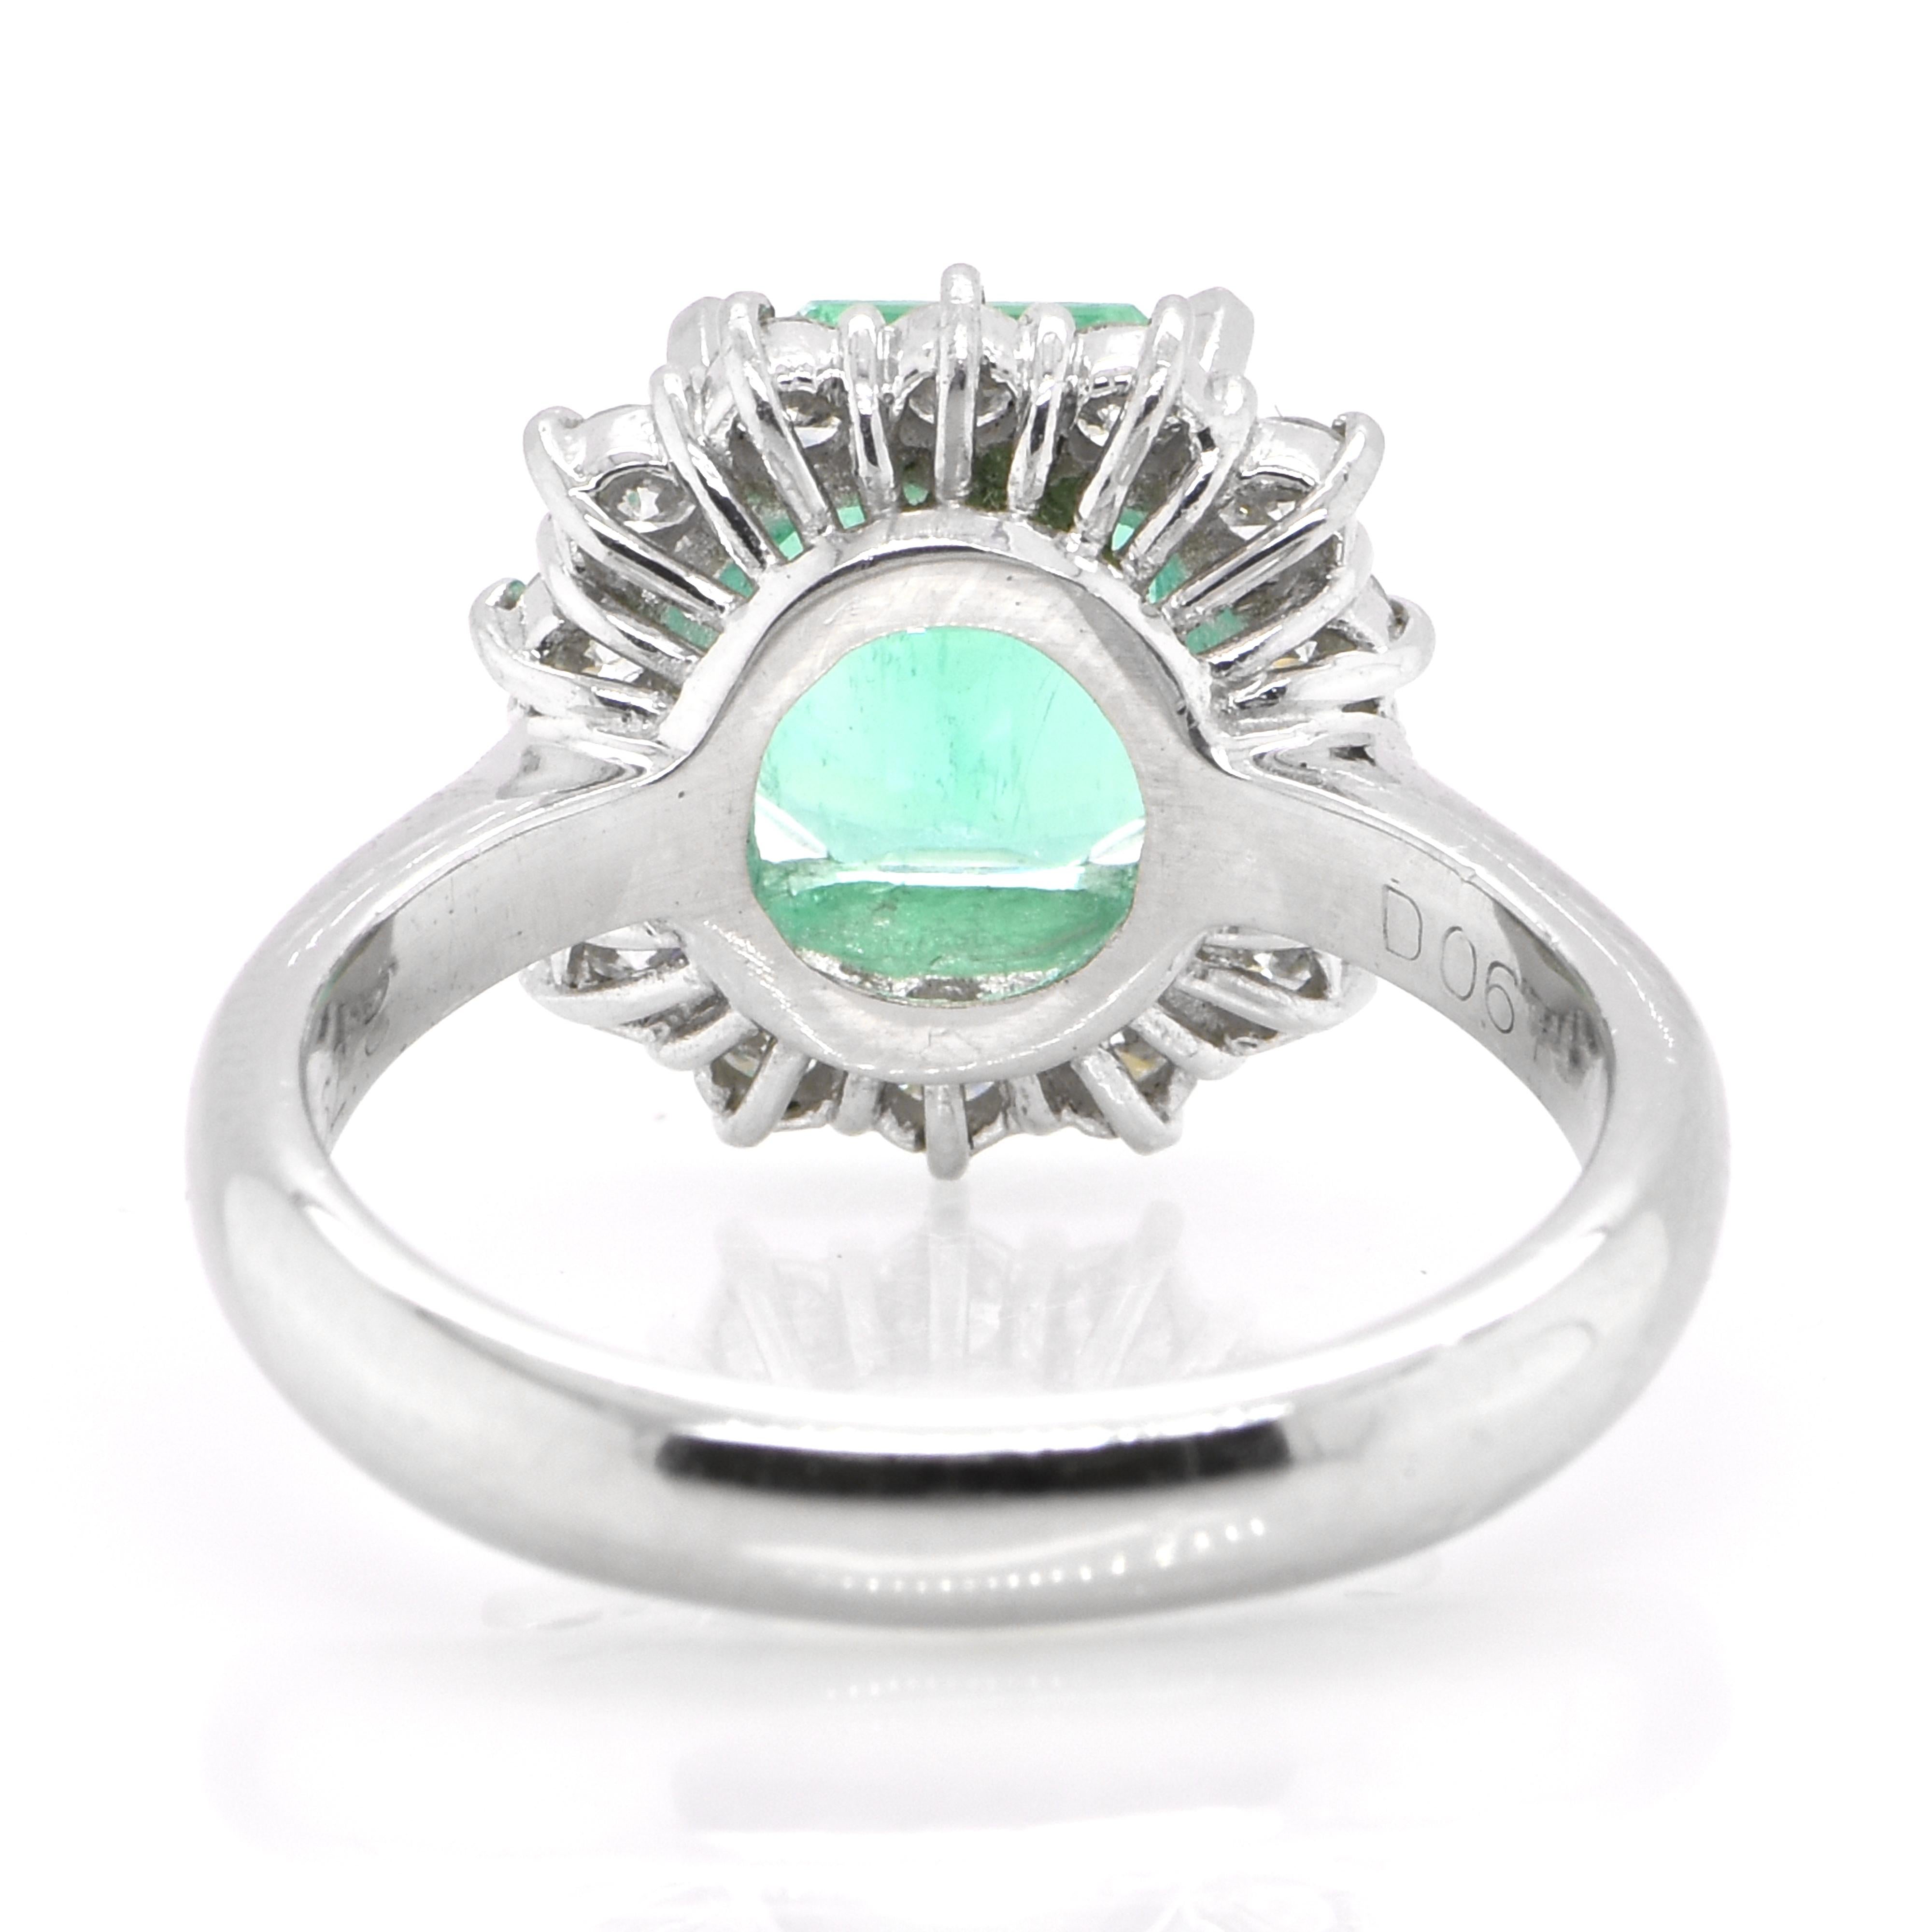 Women's 2.79 Carat Natural Colombian Emerald and Diamond Halo Ring Set in Platinum